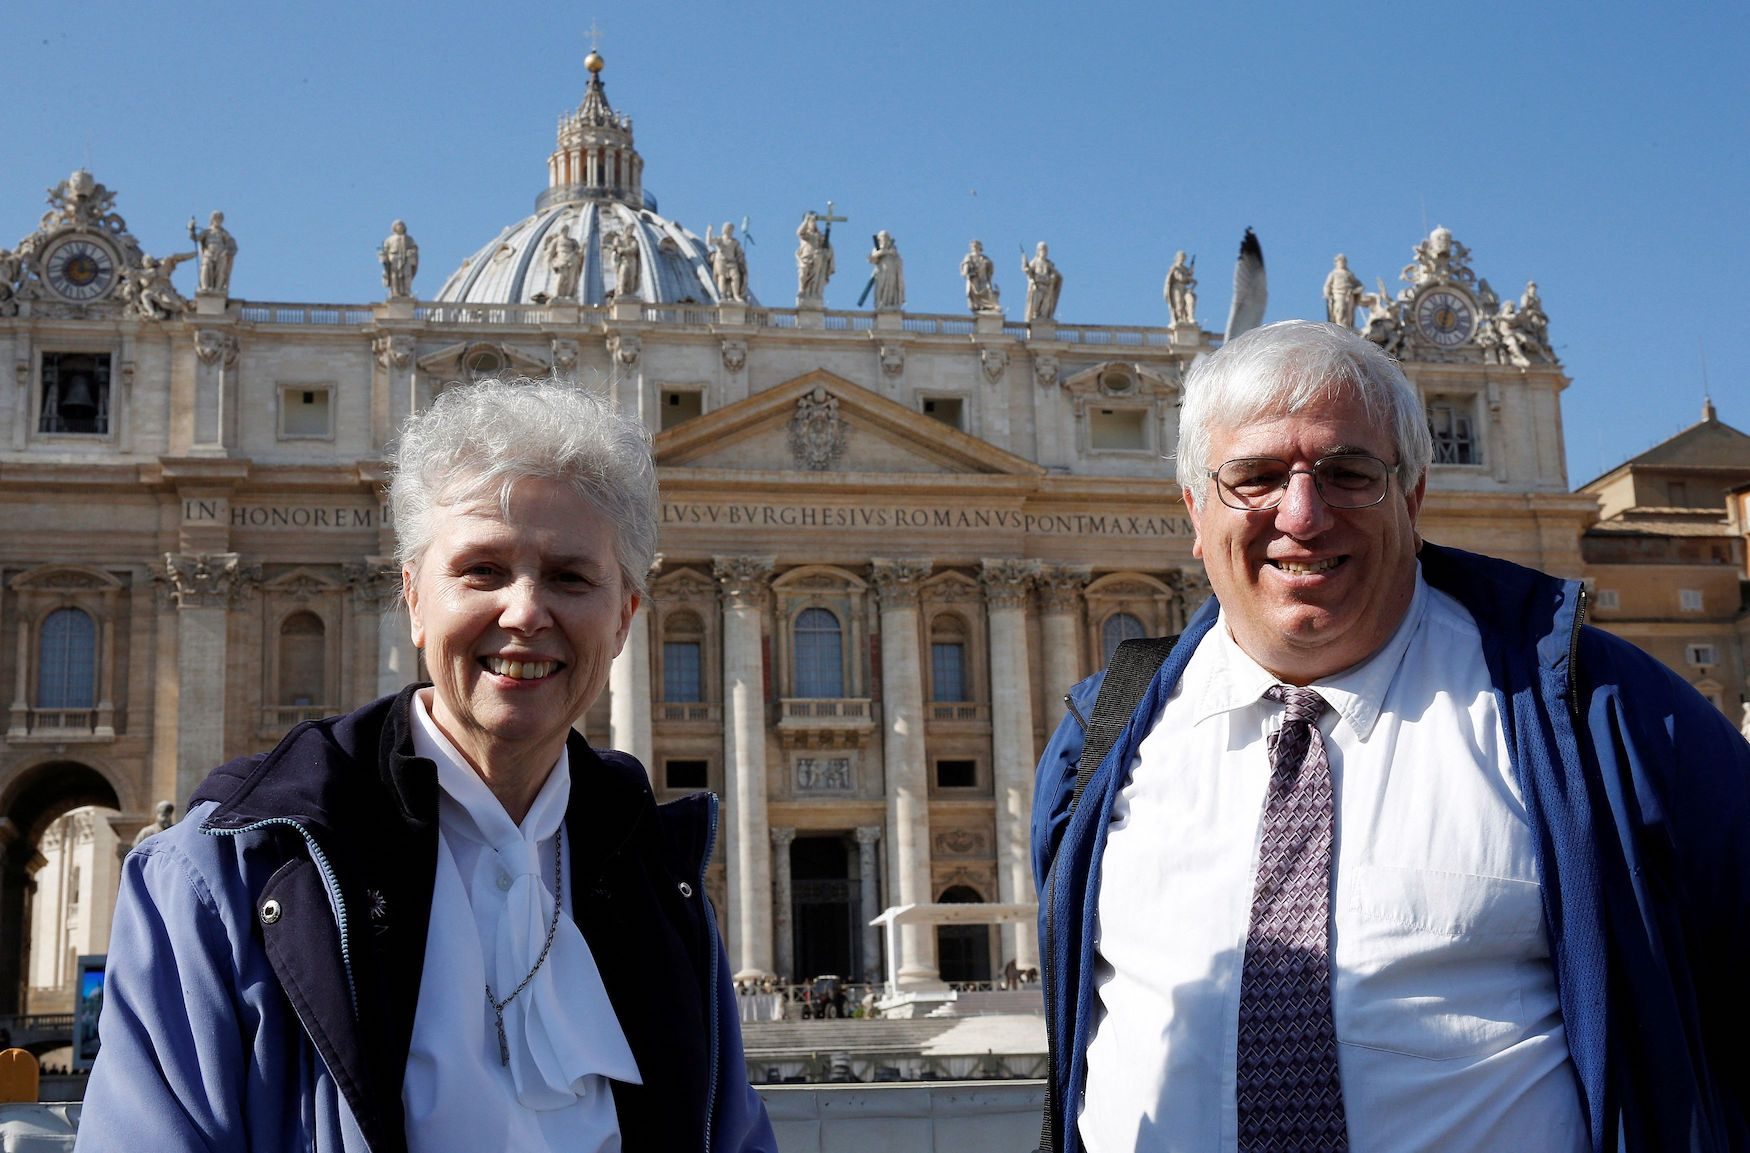 Vatican office apologizes for hurting Catholic LGBTQ community